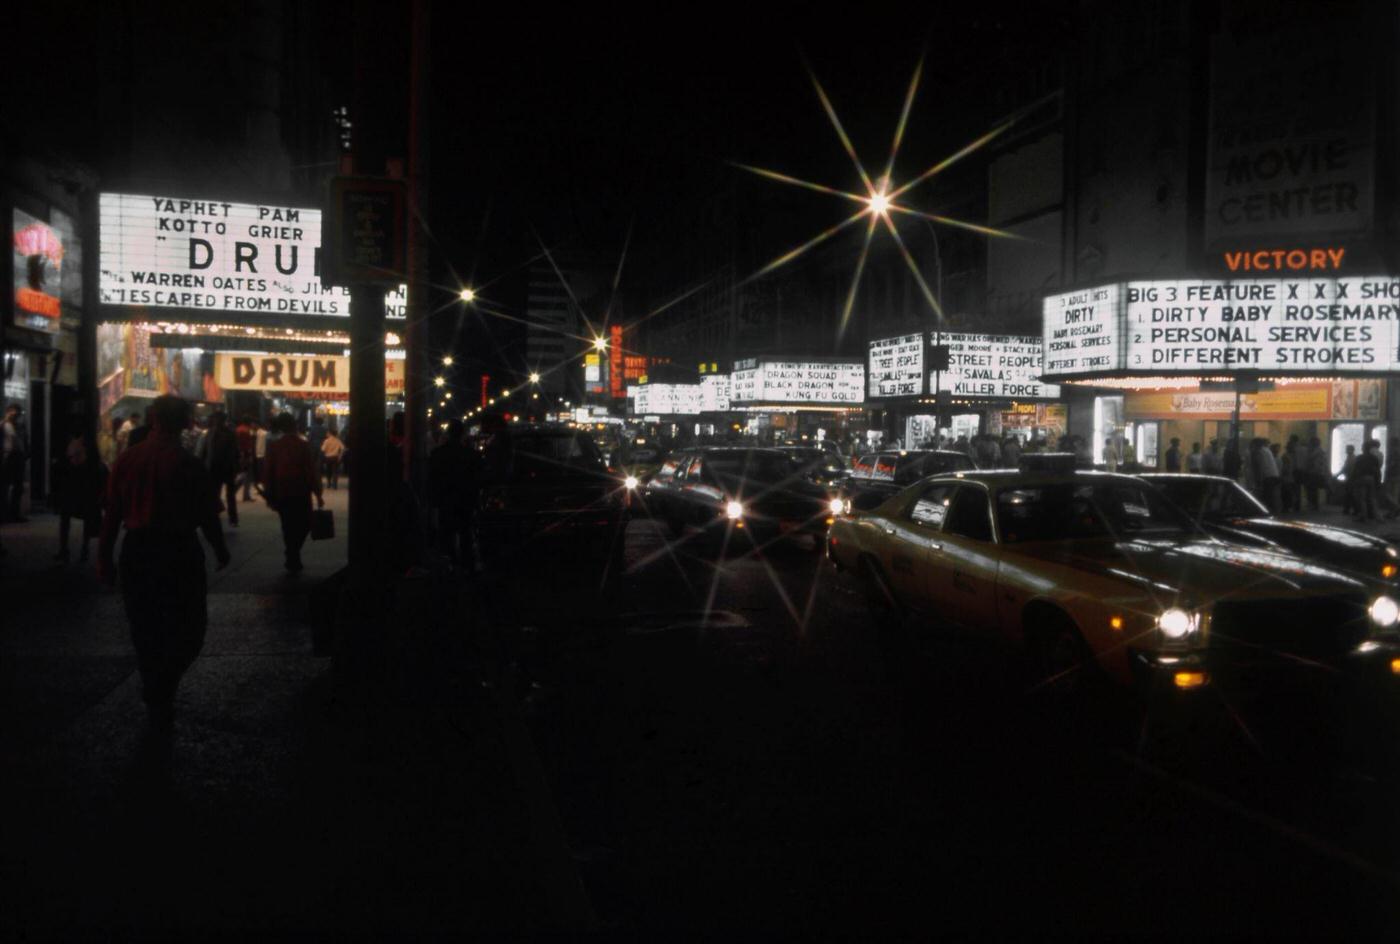 View Of The Marquees Of Cinemas On West 42Nd Street Including The Victory Theatre, The Lyric Theatre, The Times Square Theater And The Apollo Theatre In Manhattan, 1976.